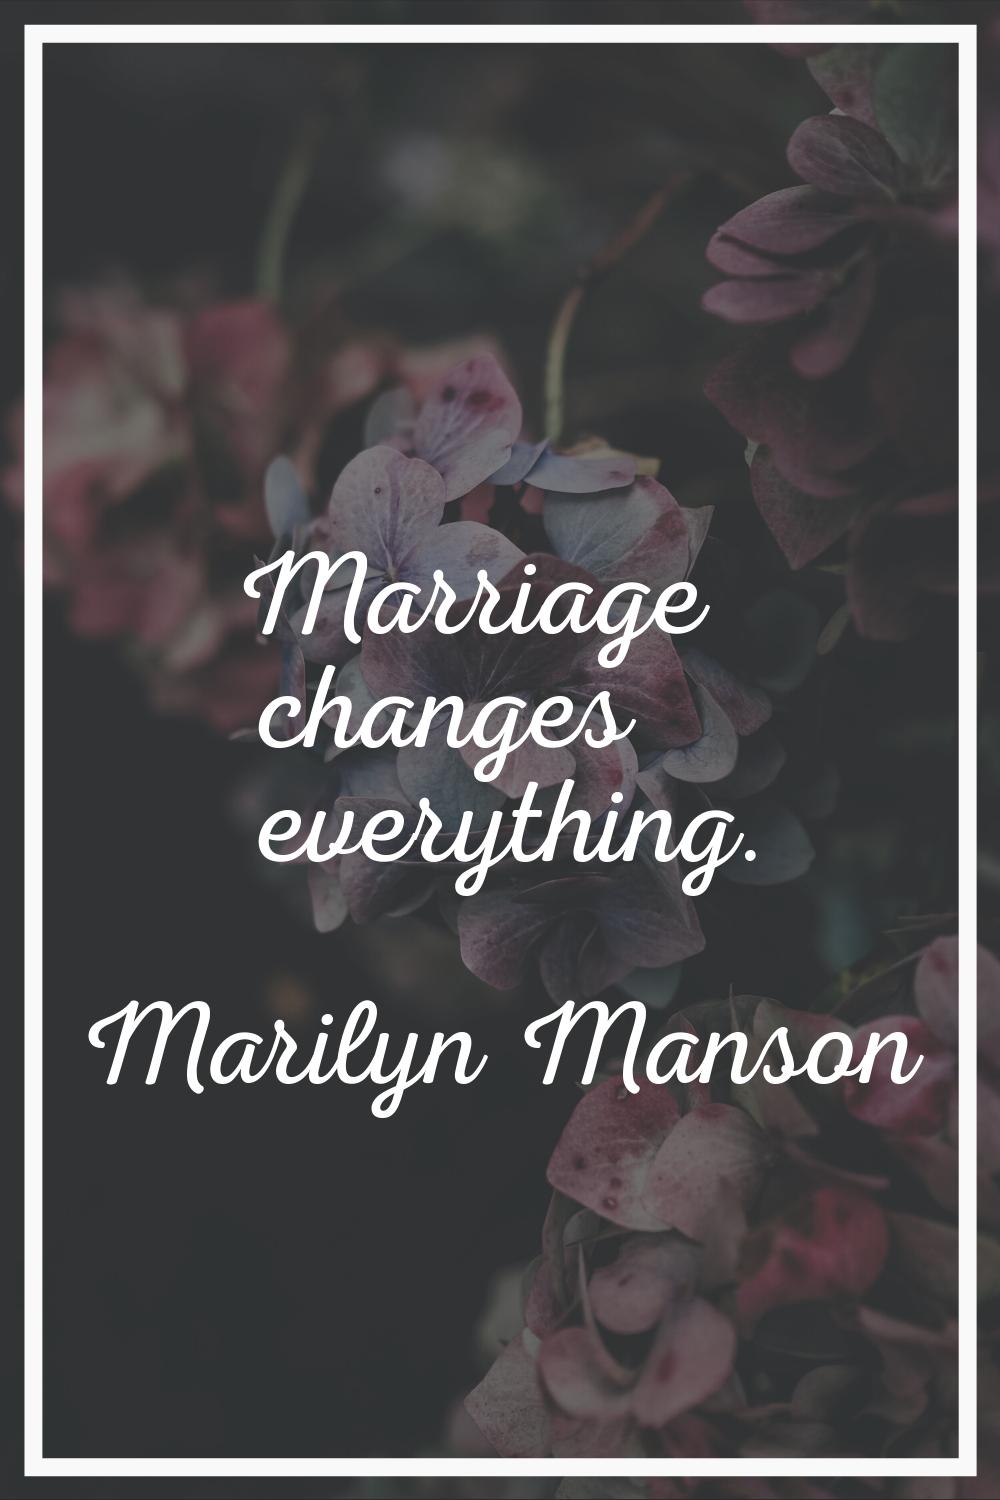 Marriage changes everything.